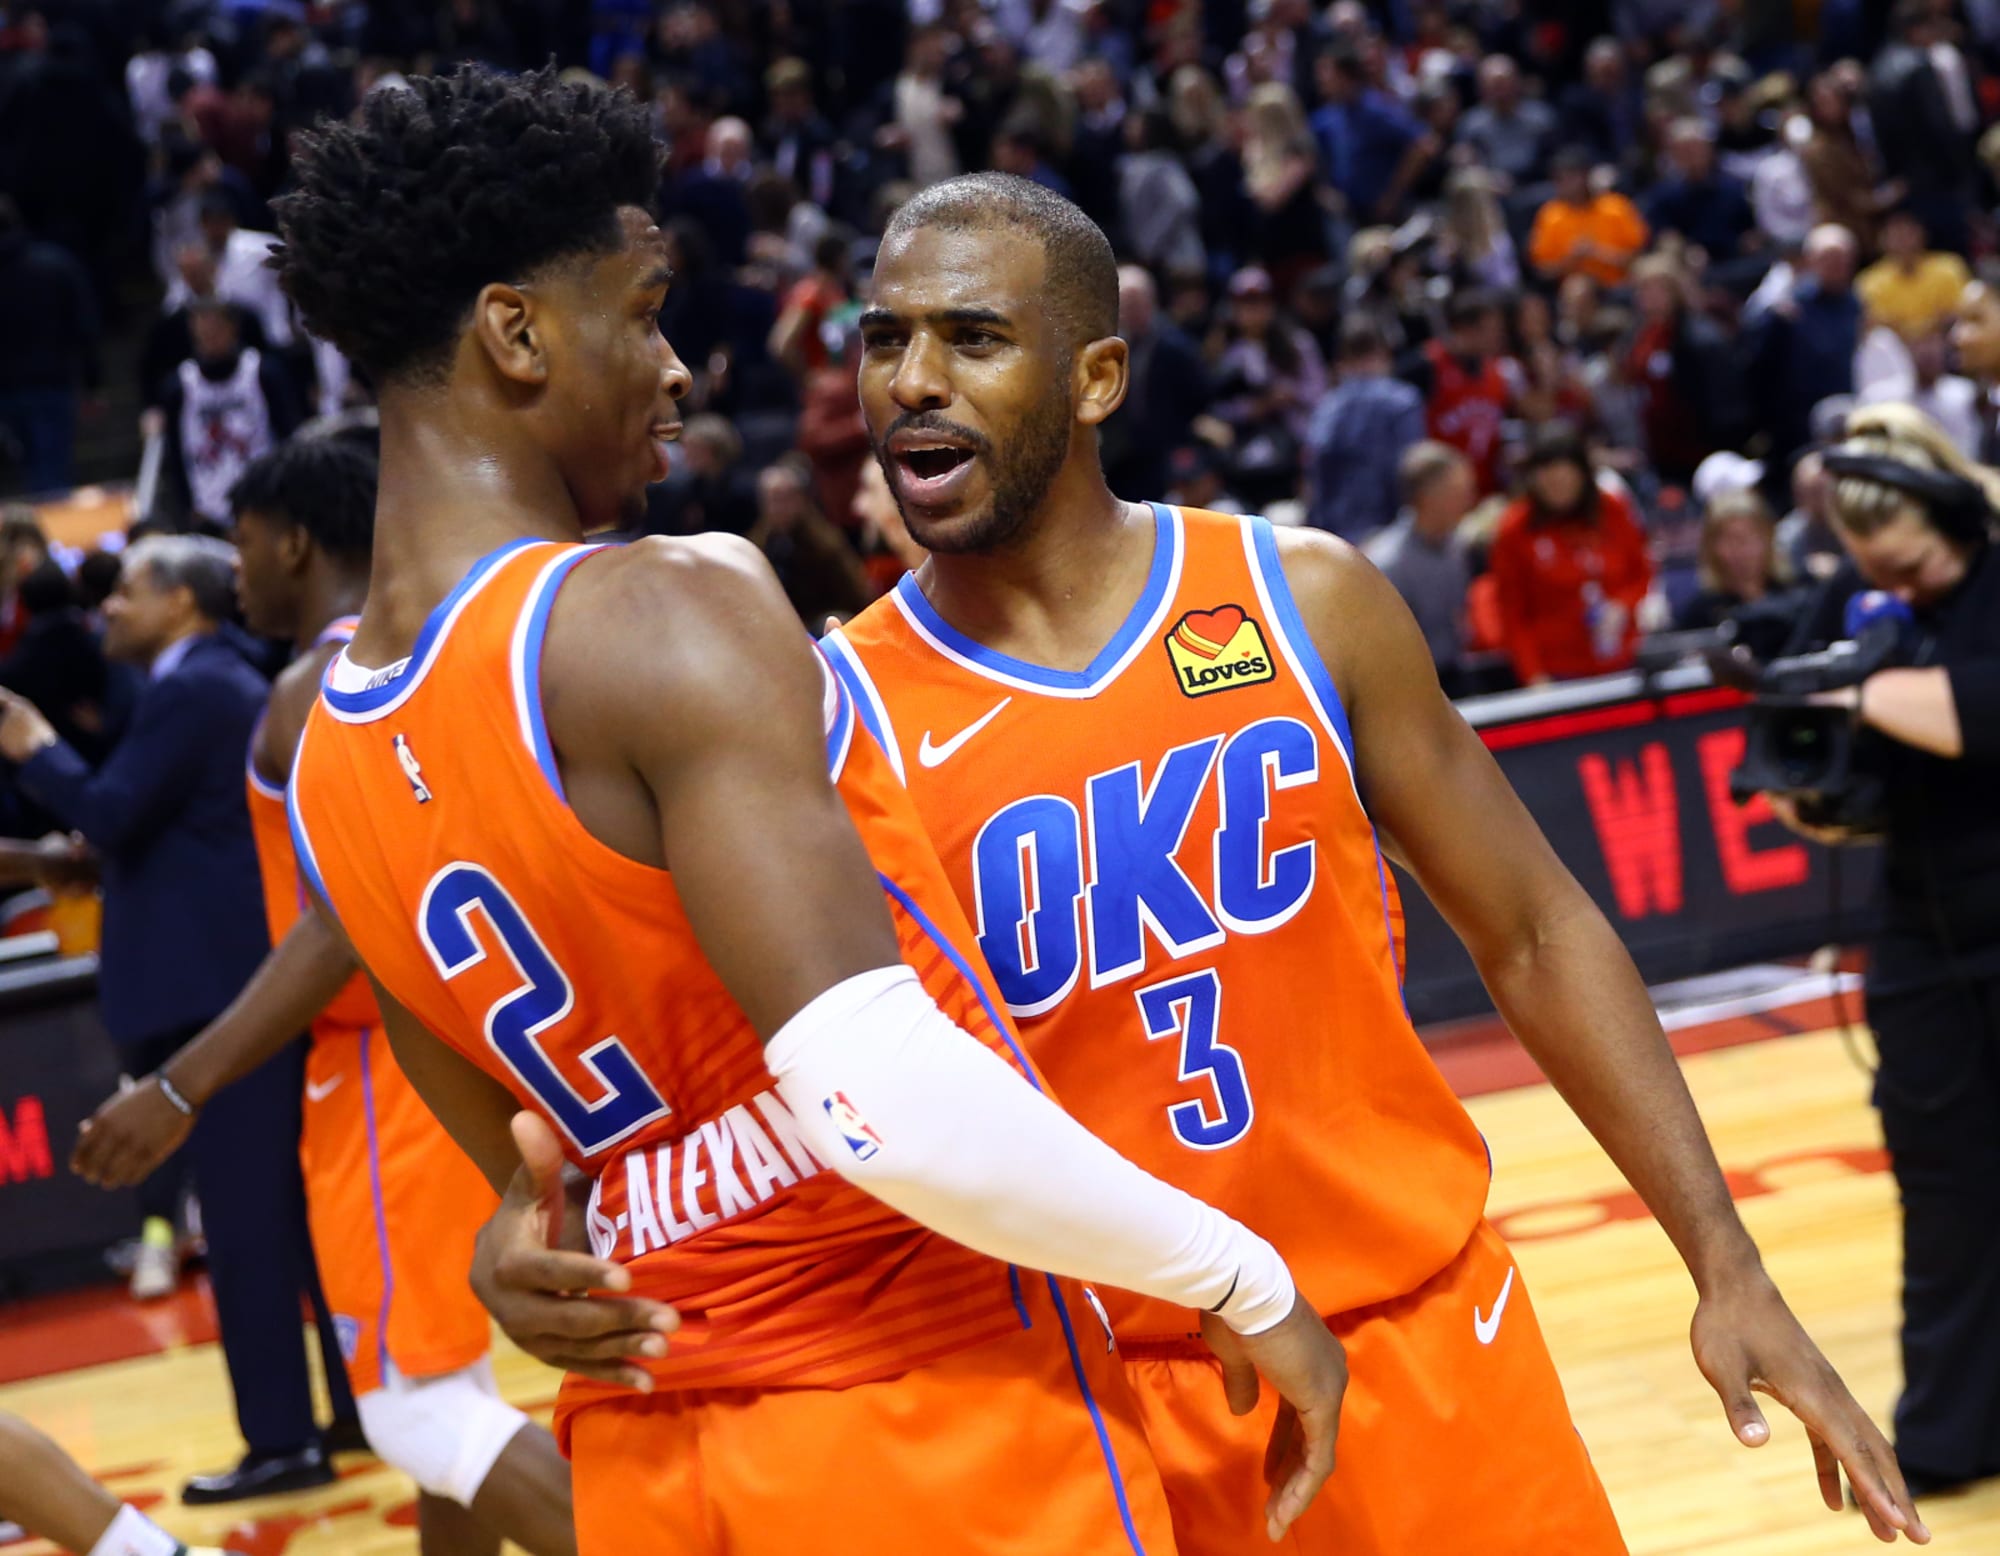 OKC Thunder: B/R views one specific game as 'must see TV'